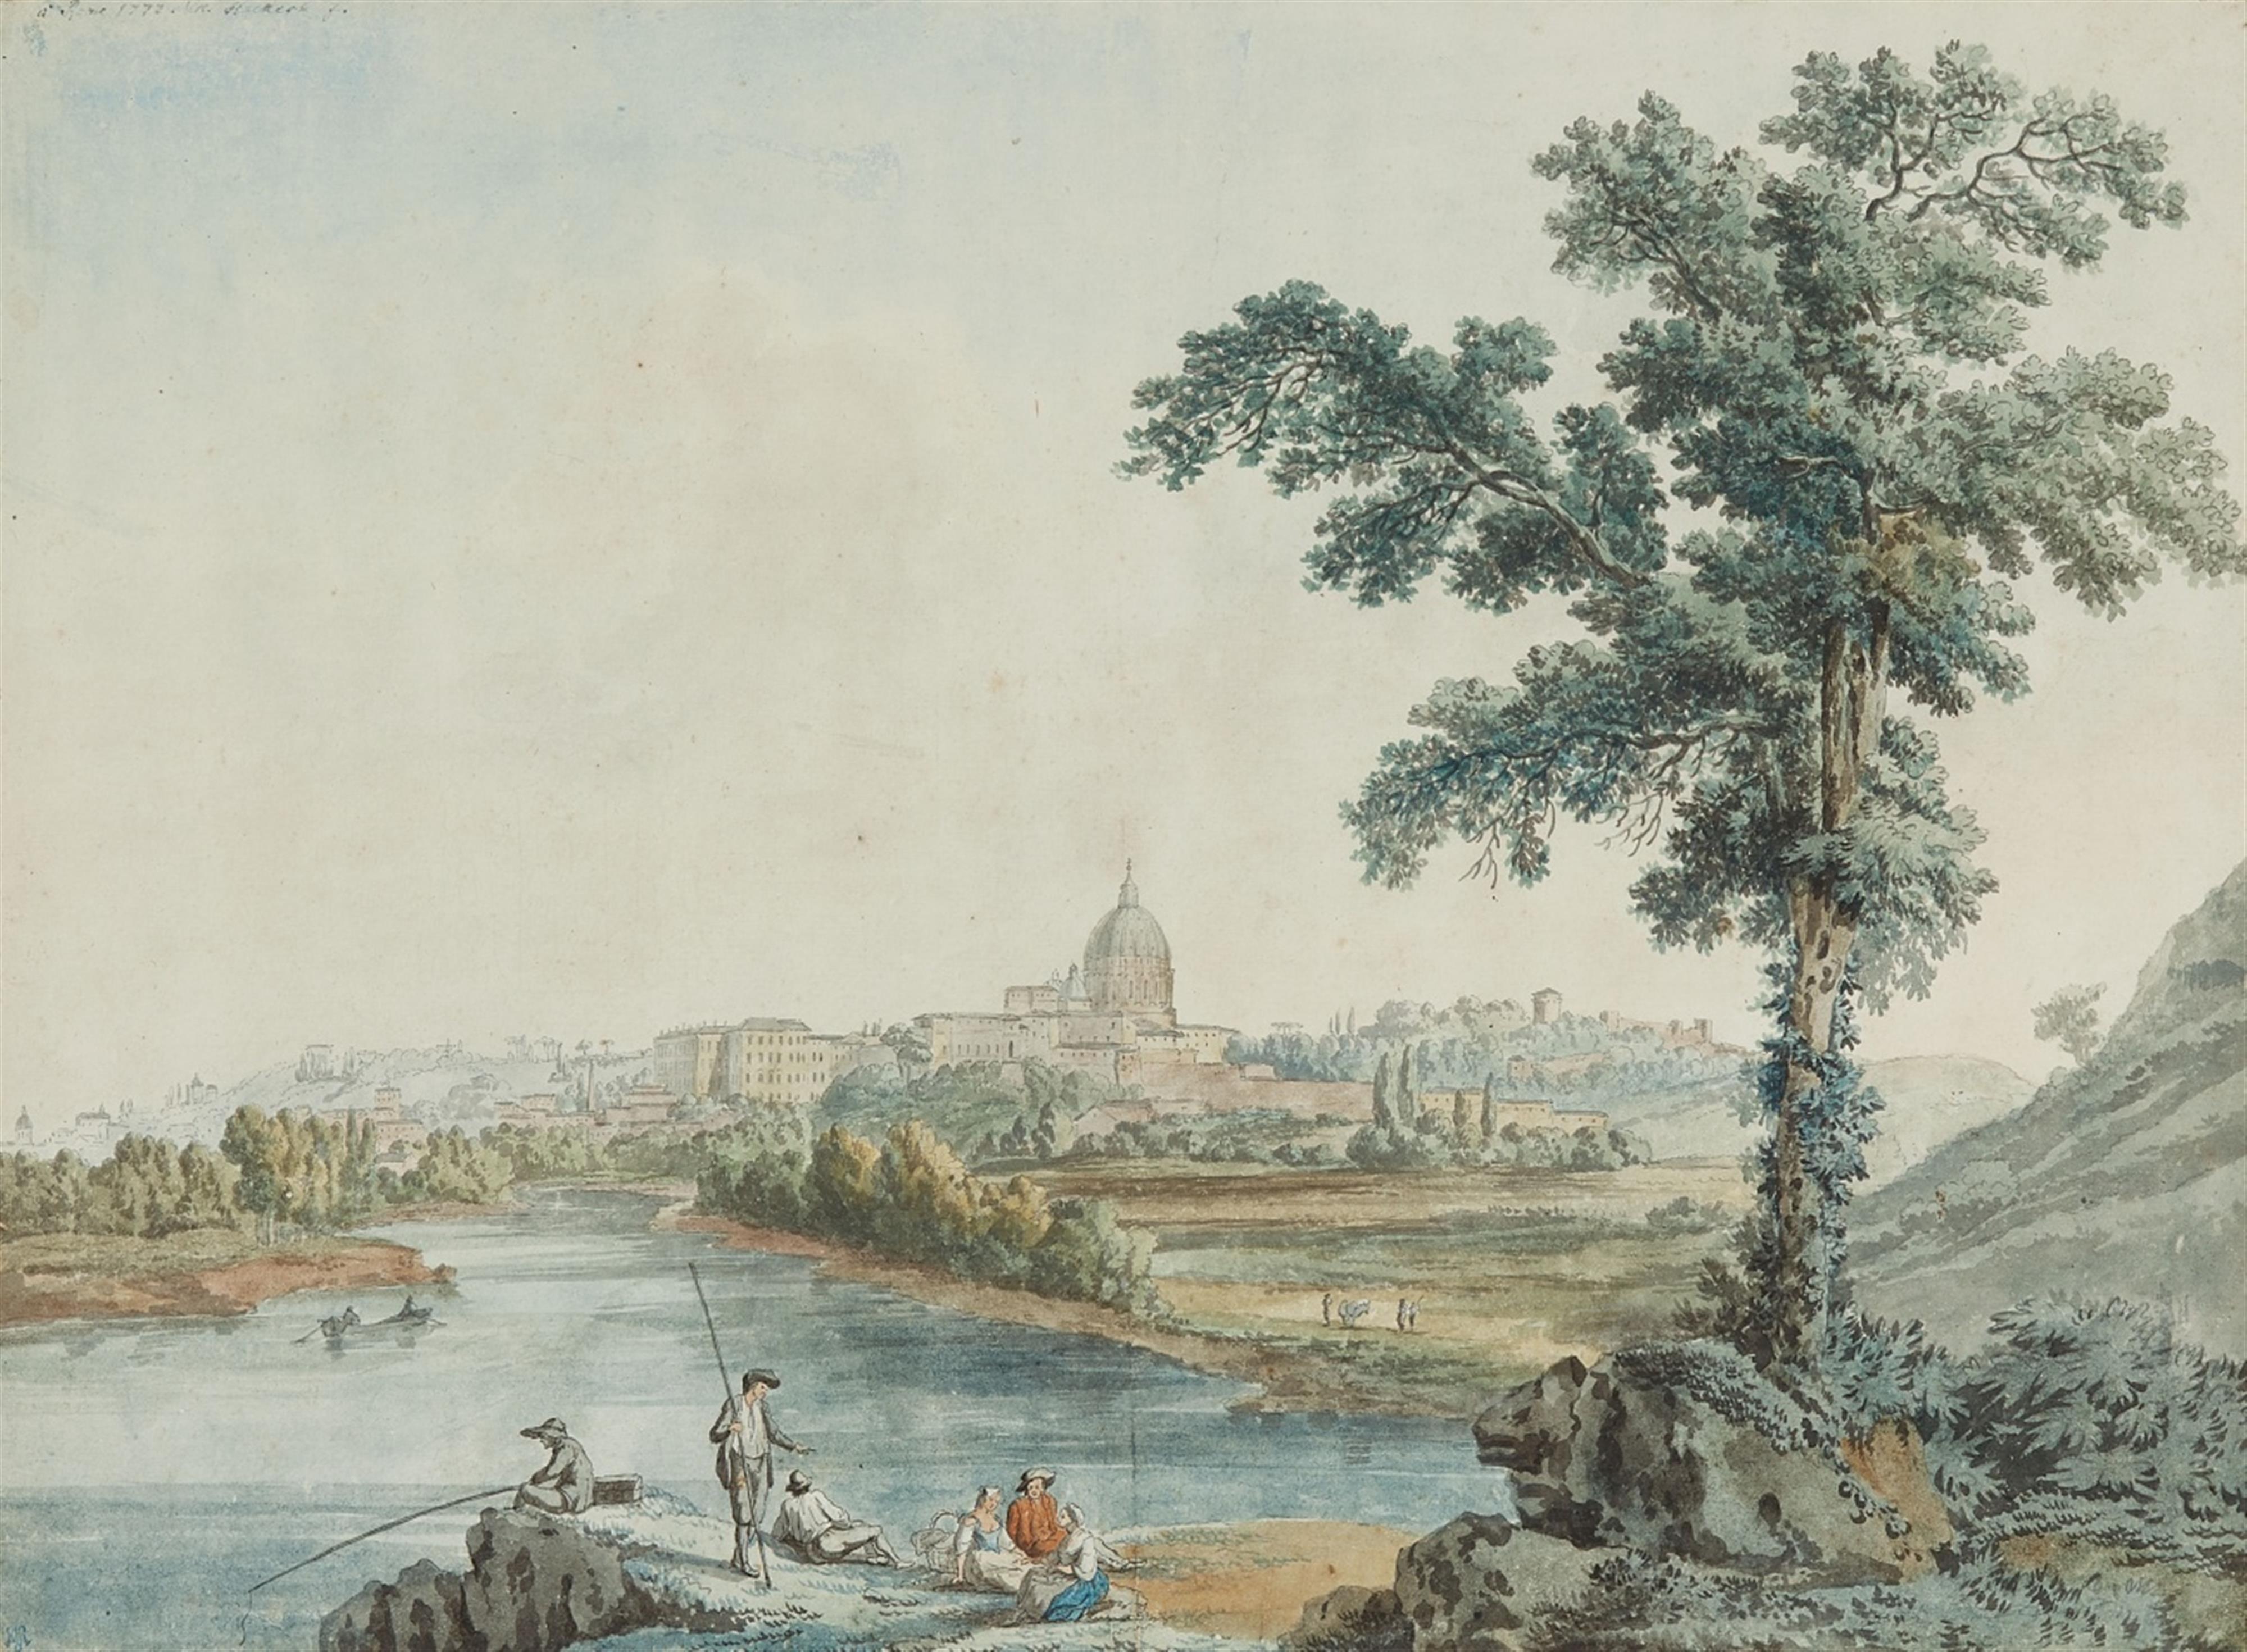 Jacob Philipp Hackert - View of the River Tiber and Saint Peter's in Rome - image-1